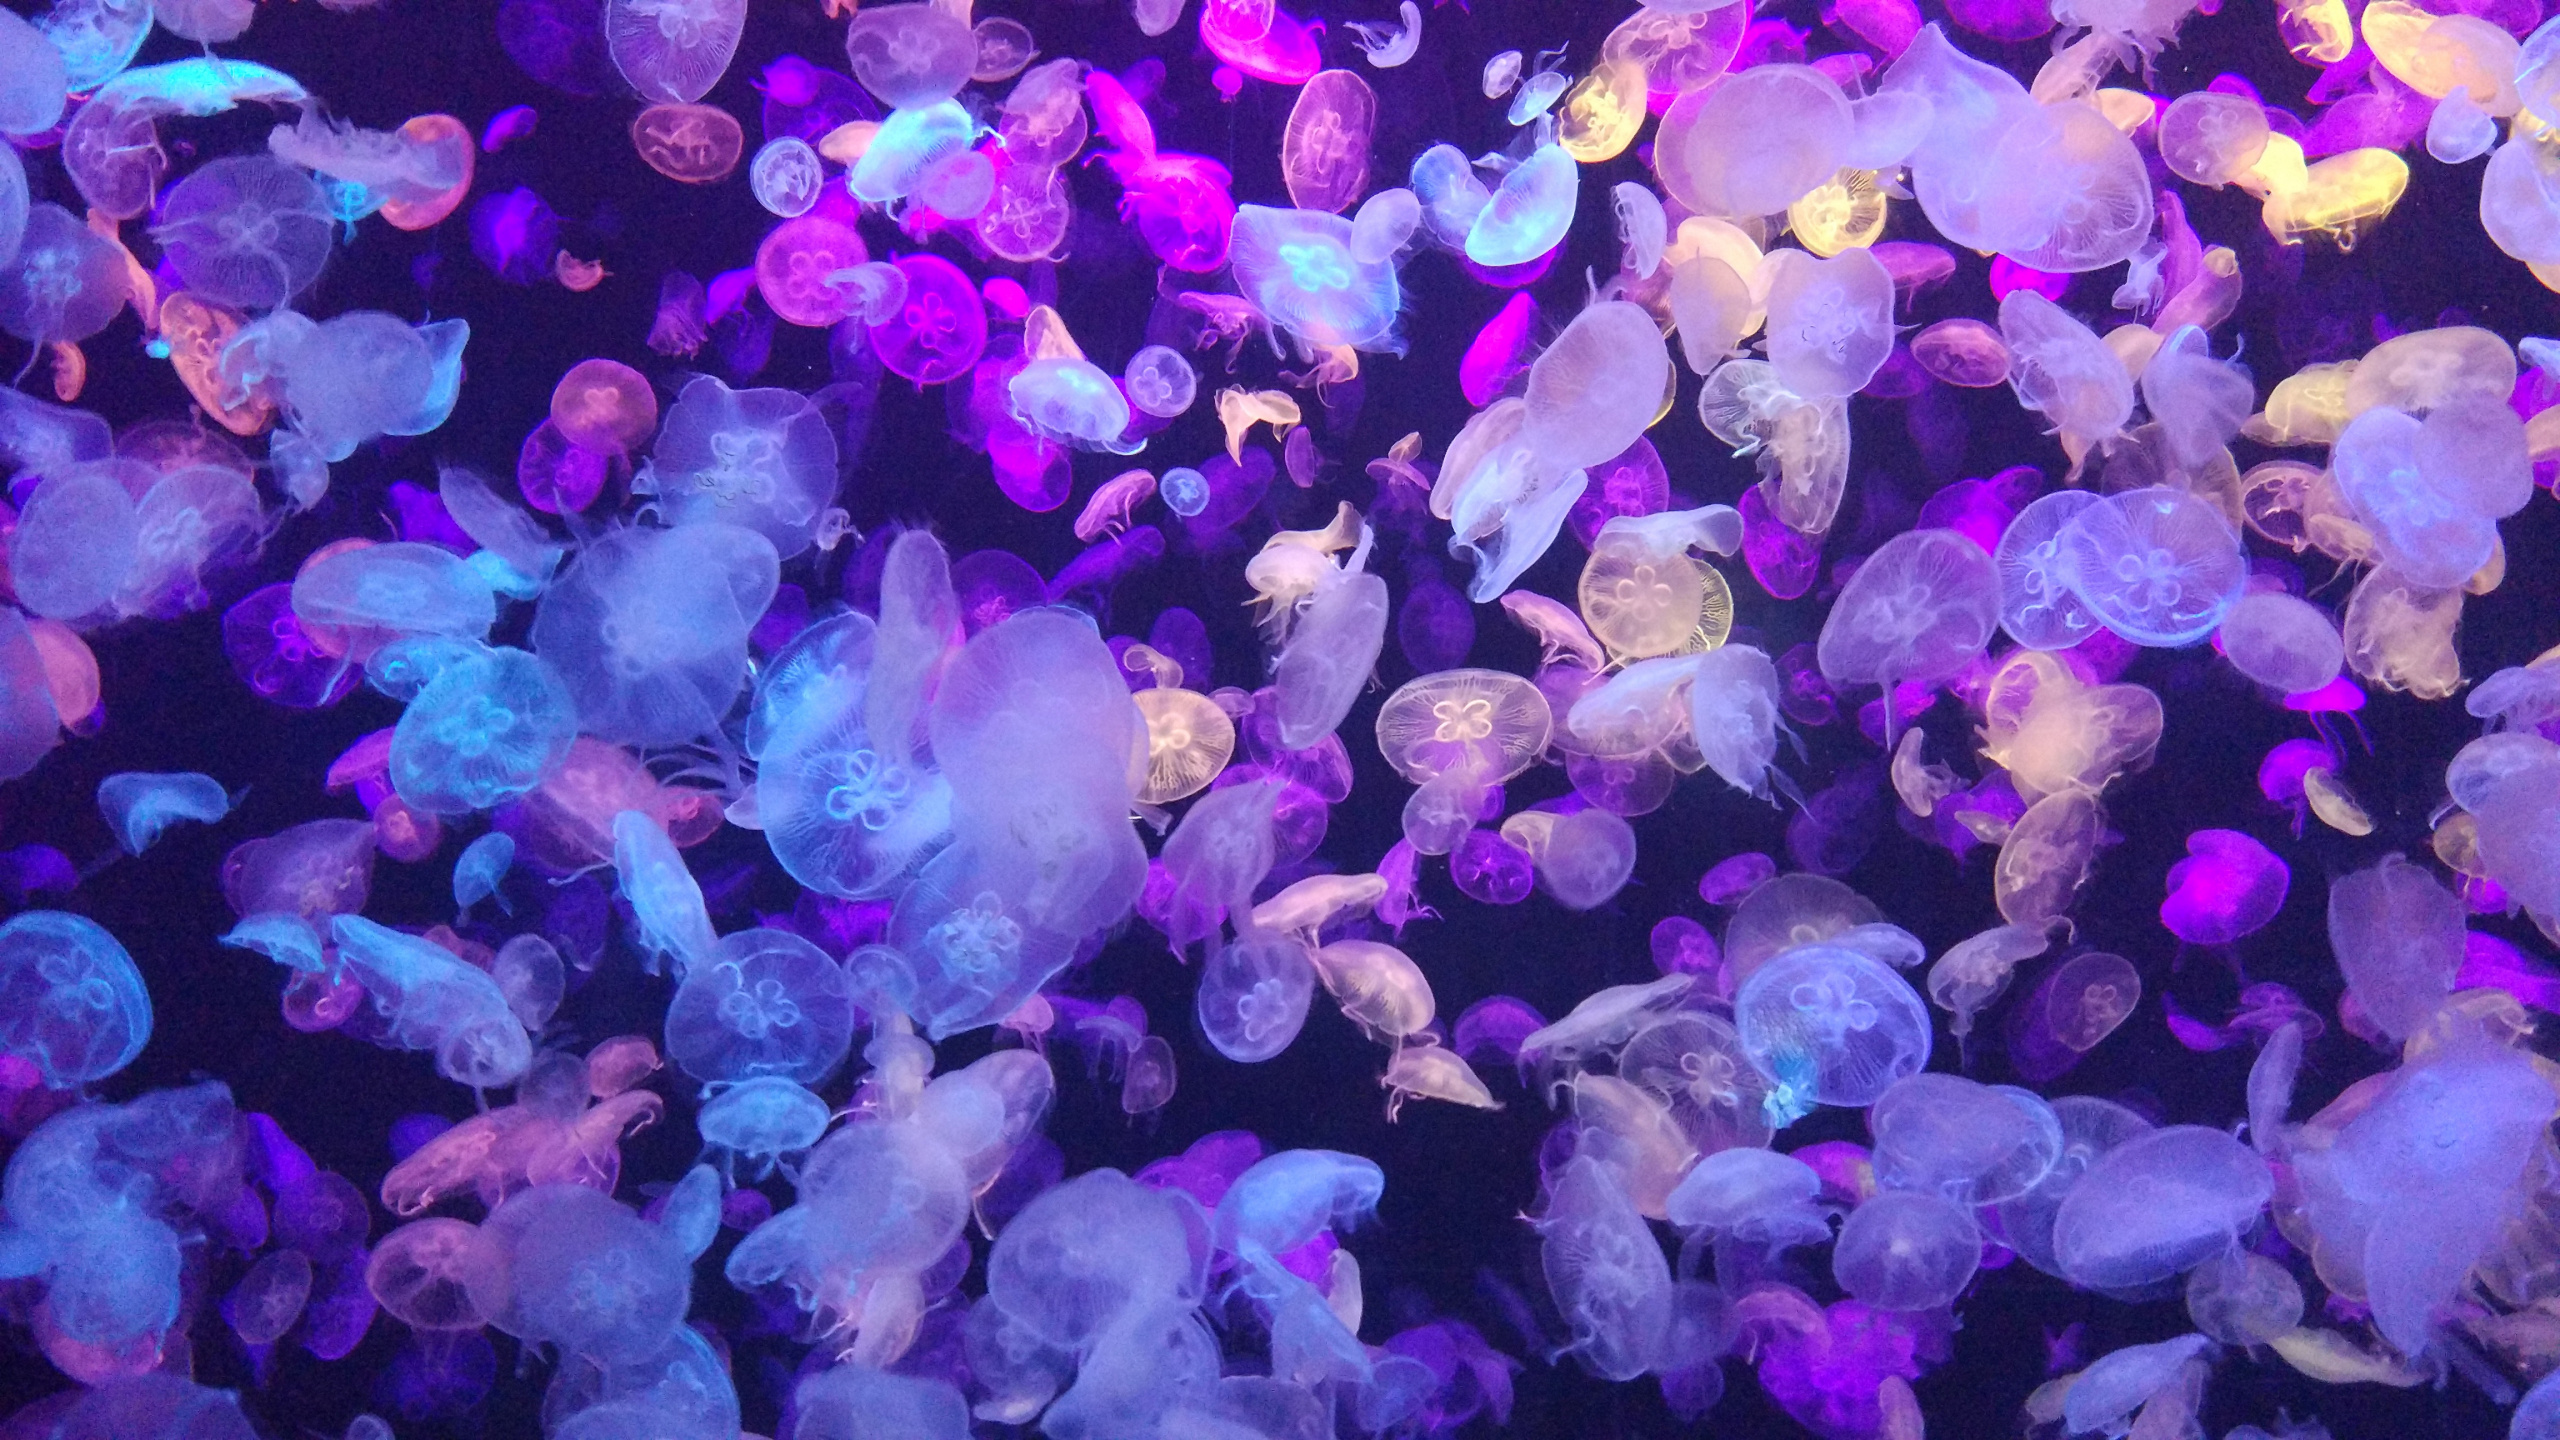 Purple and White Jelly Fish. Wallpaper in 2560x1440 Resolution